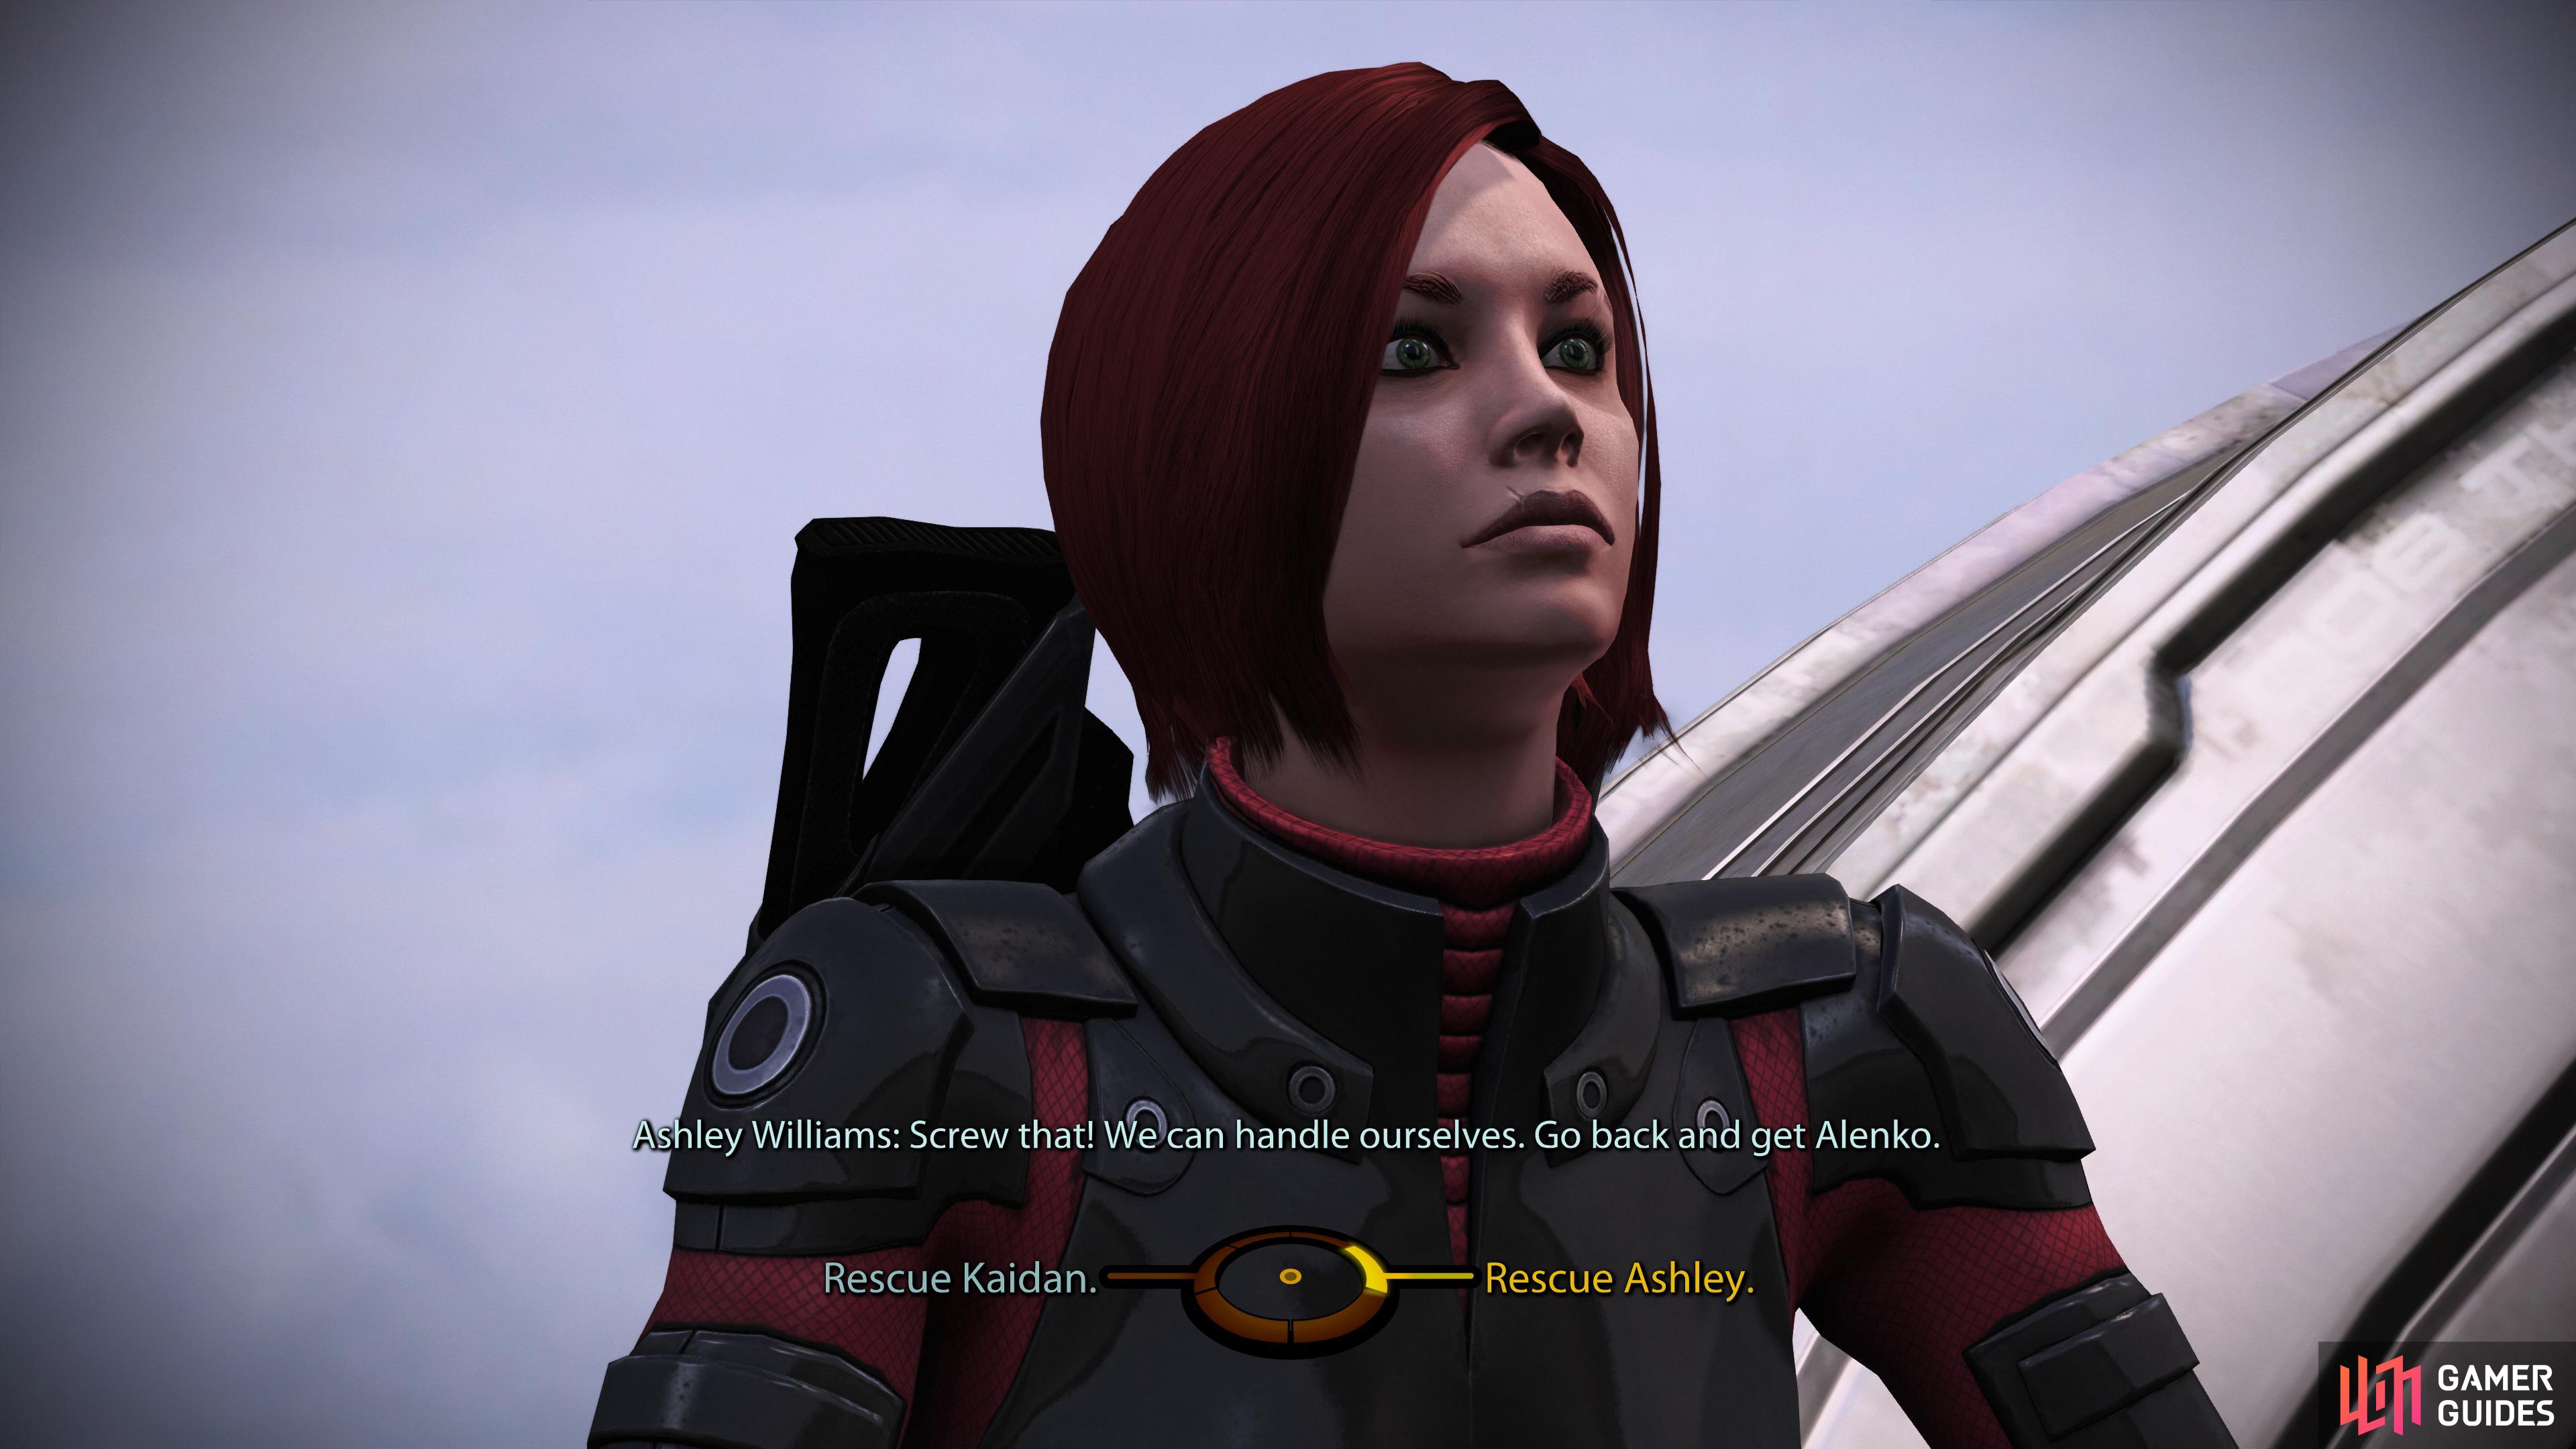 When you approach the AA Tower, you'll get more bad news, forcing you to choose between rescuing Kaiden or Ashley.